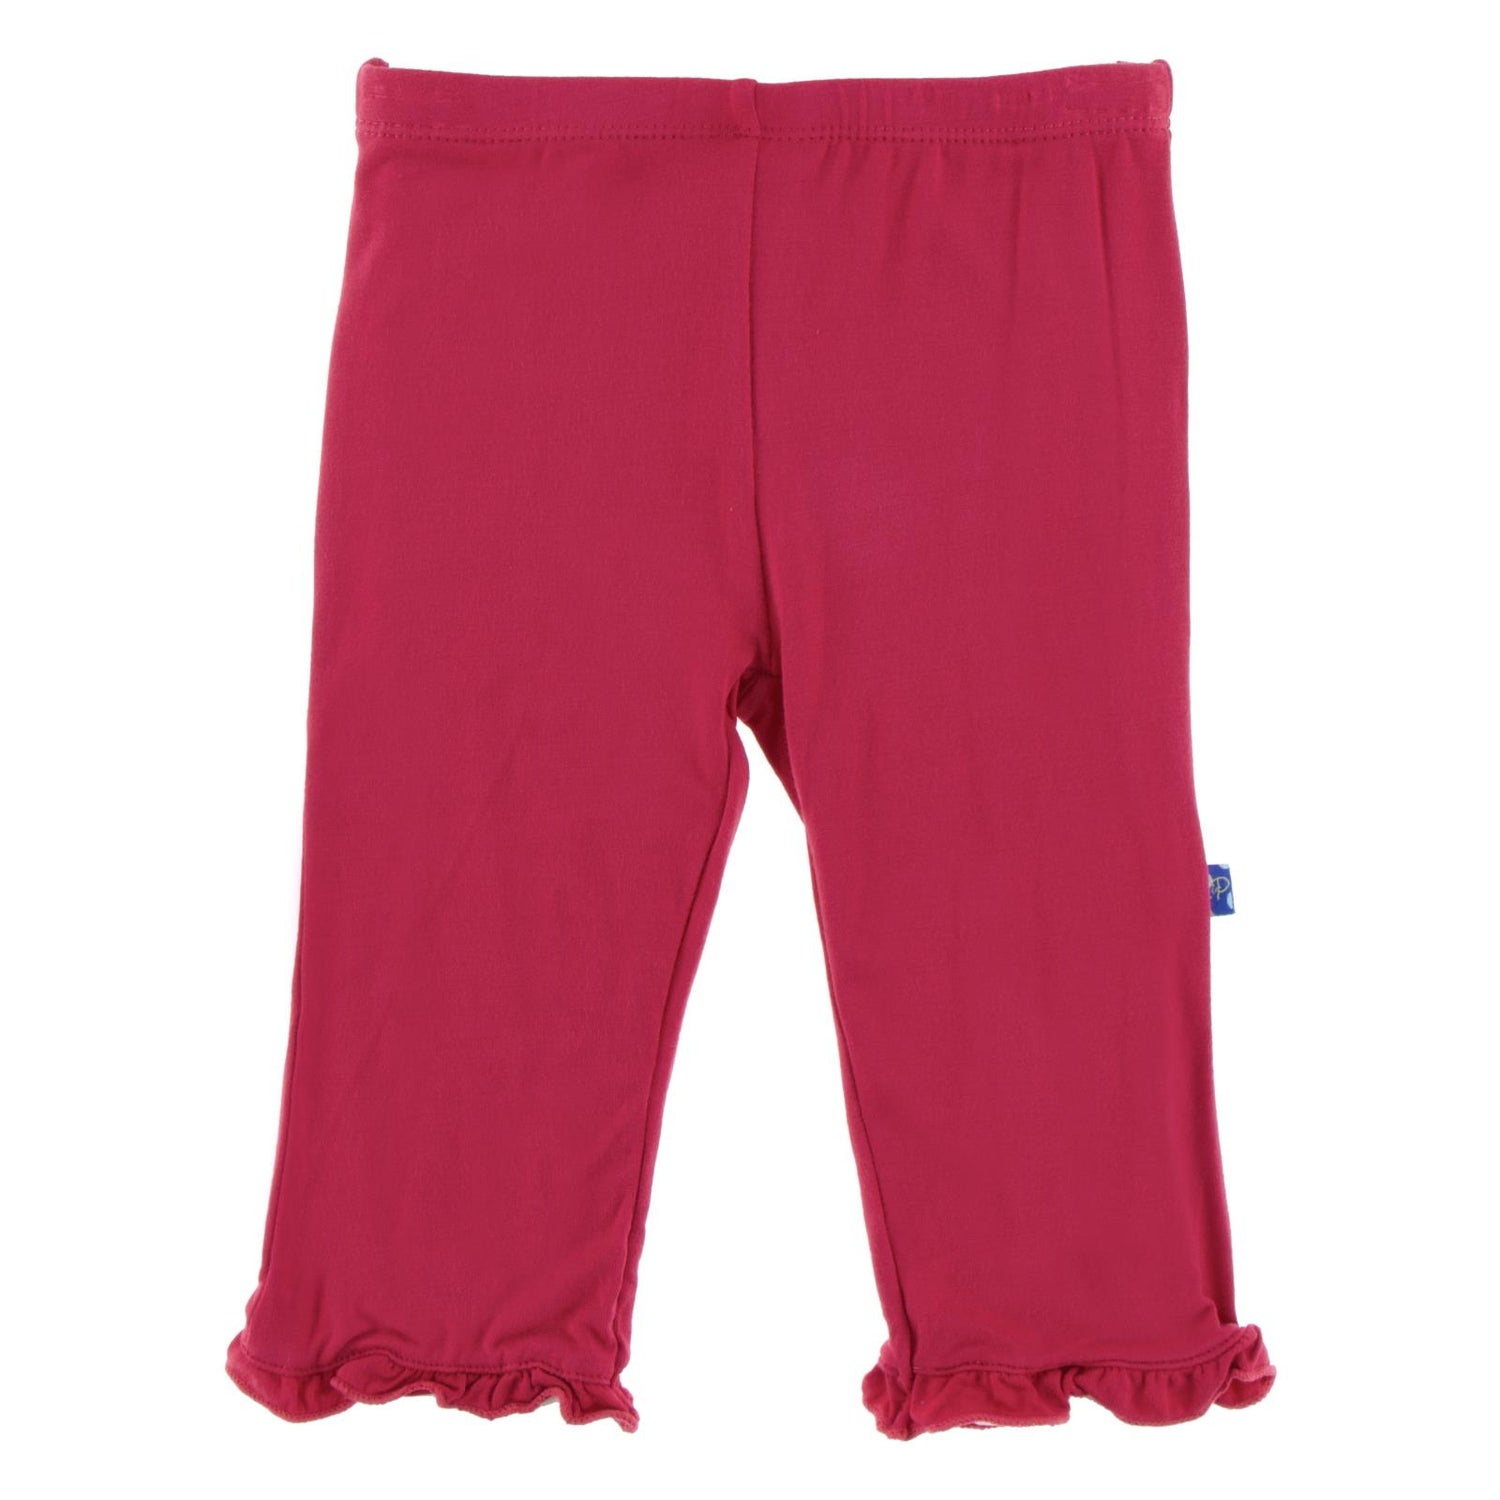 Ruffle Pants in Flag Red